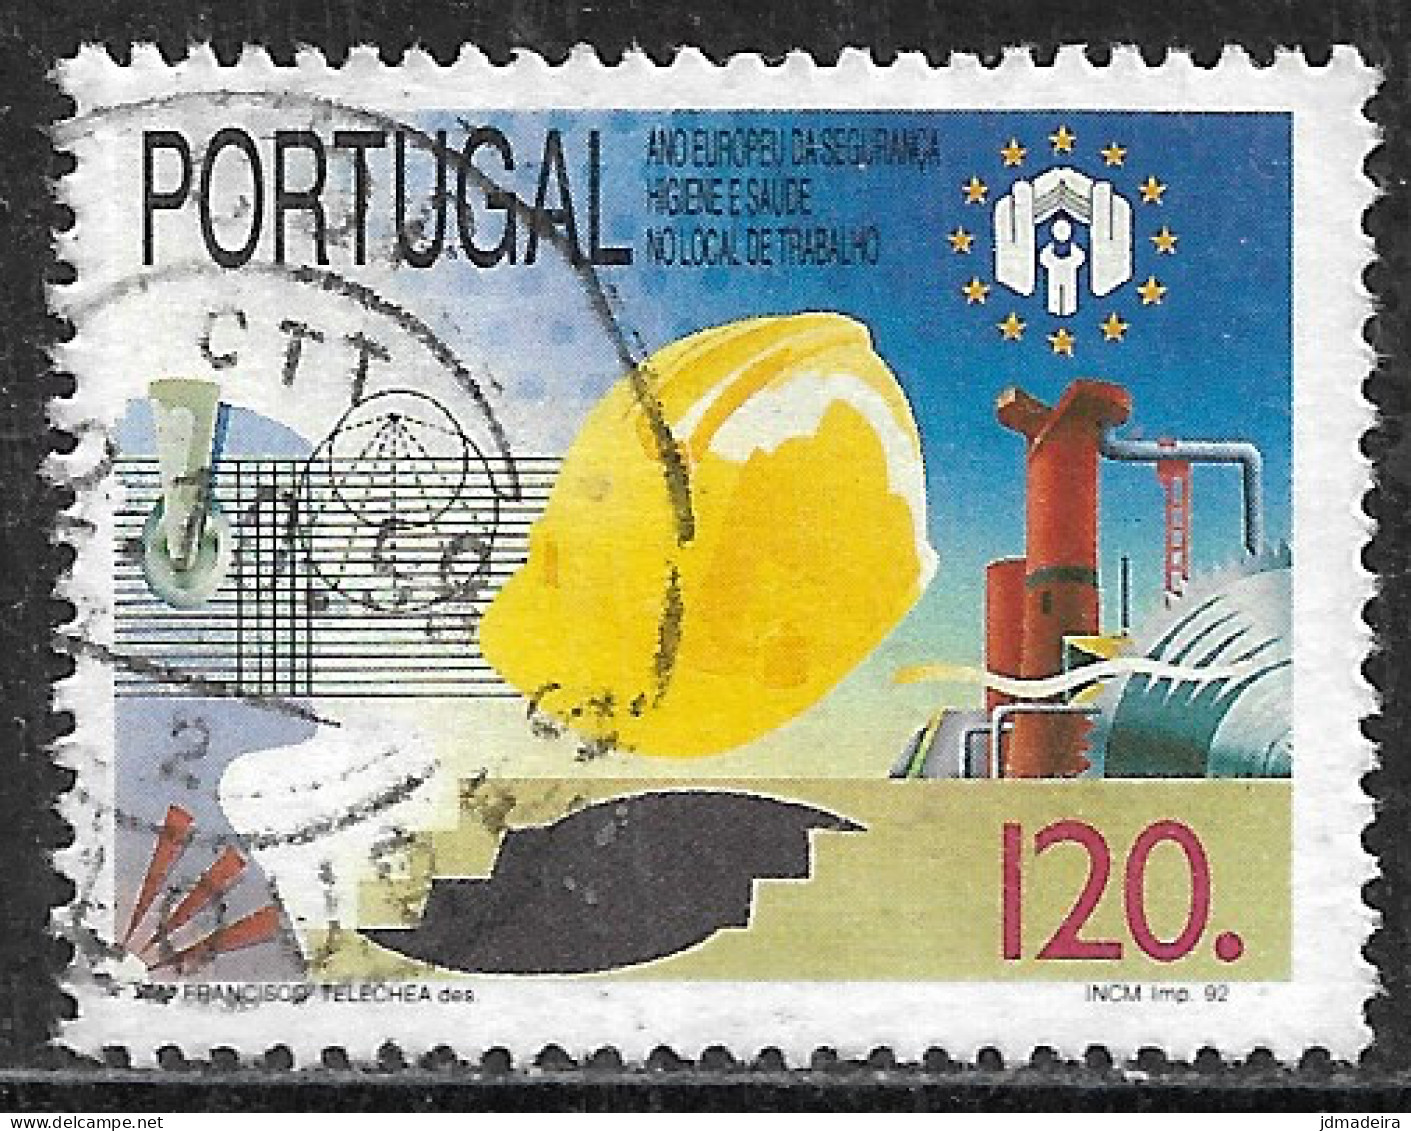 Portugal – 1992 European Year Safety At Work 120. Used Stamp - Used Stamps